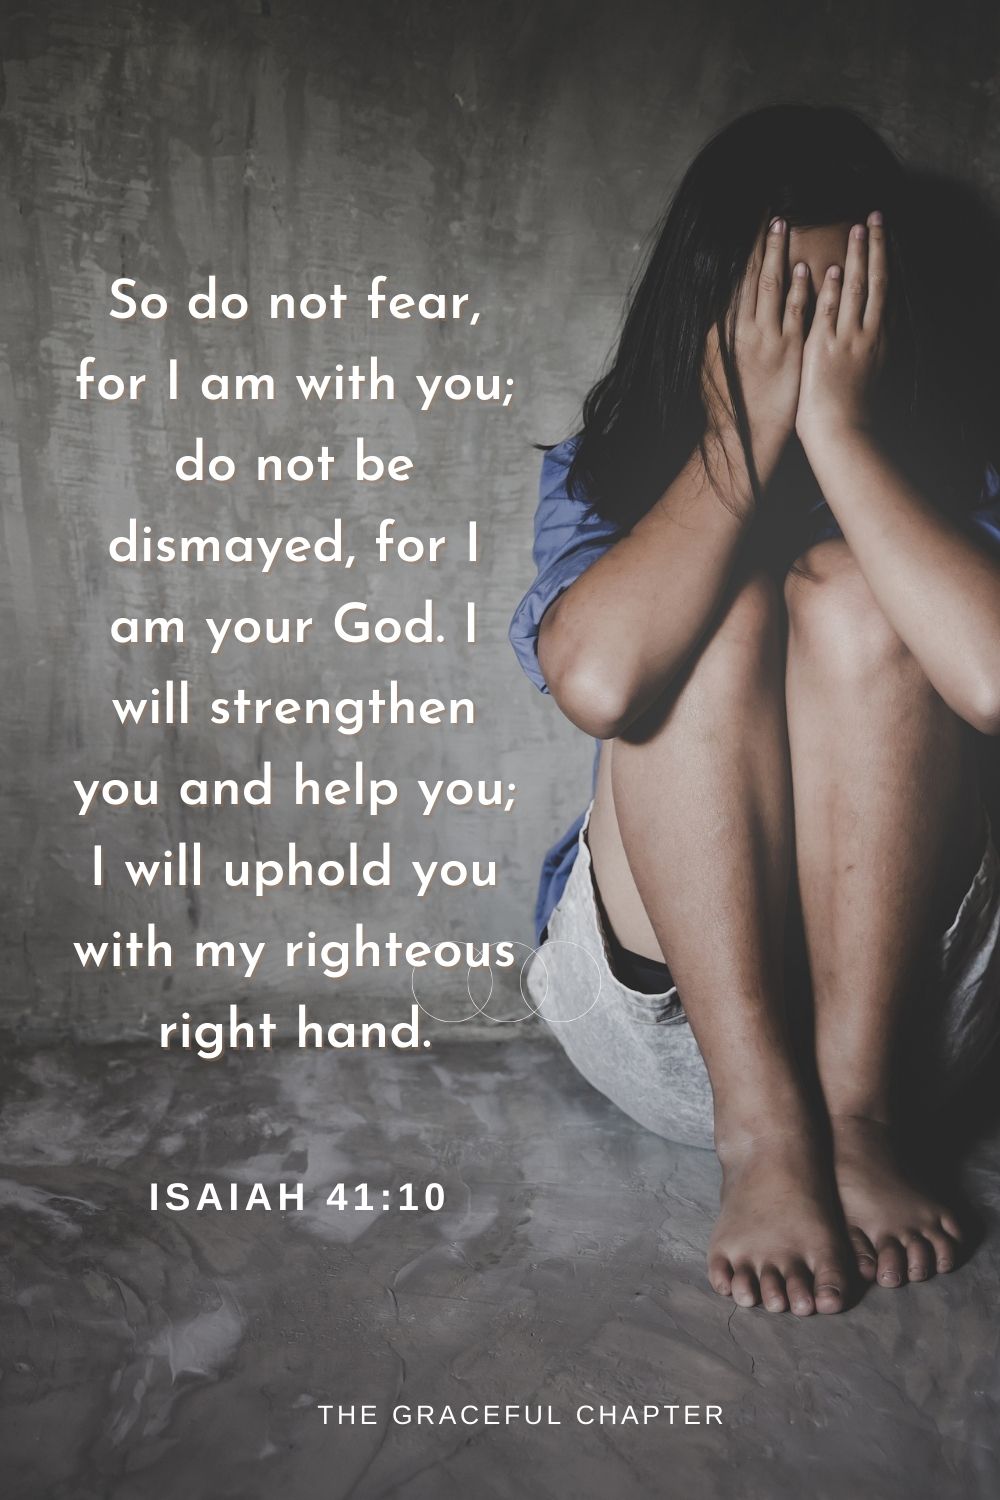 So do not fear, for I am with you; do not be dismayed, for I am your God. I will strengthen you and help you; I will uphold you with my righteous right hand.